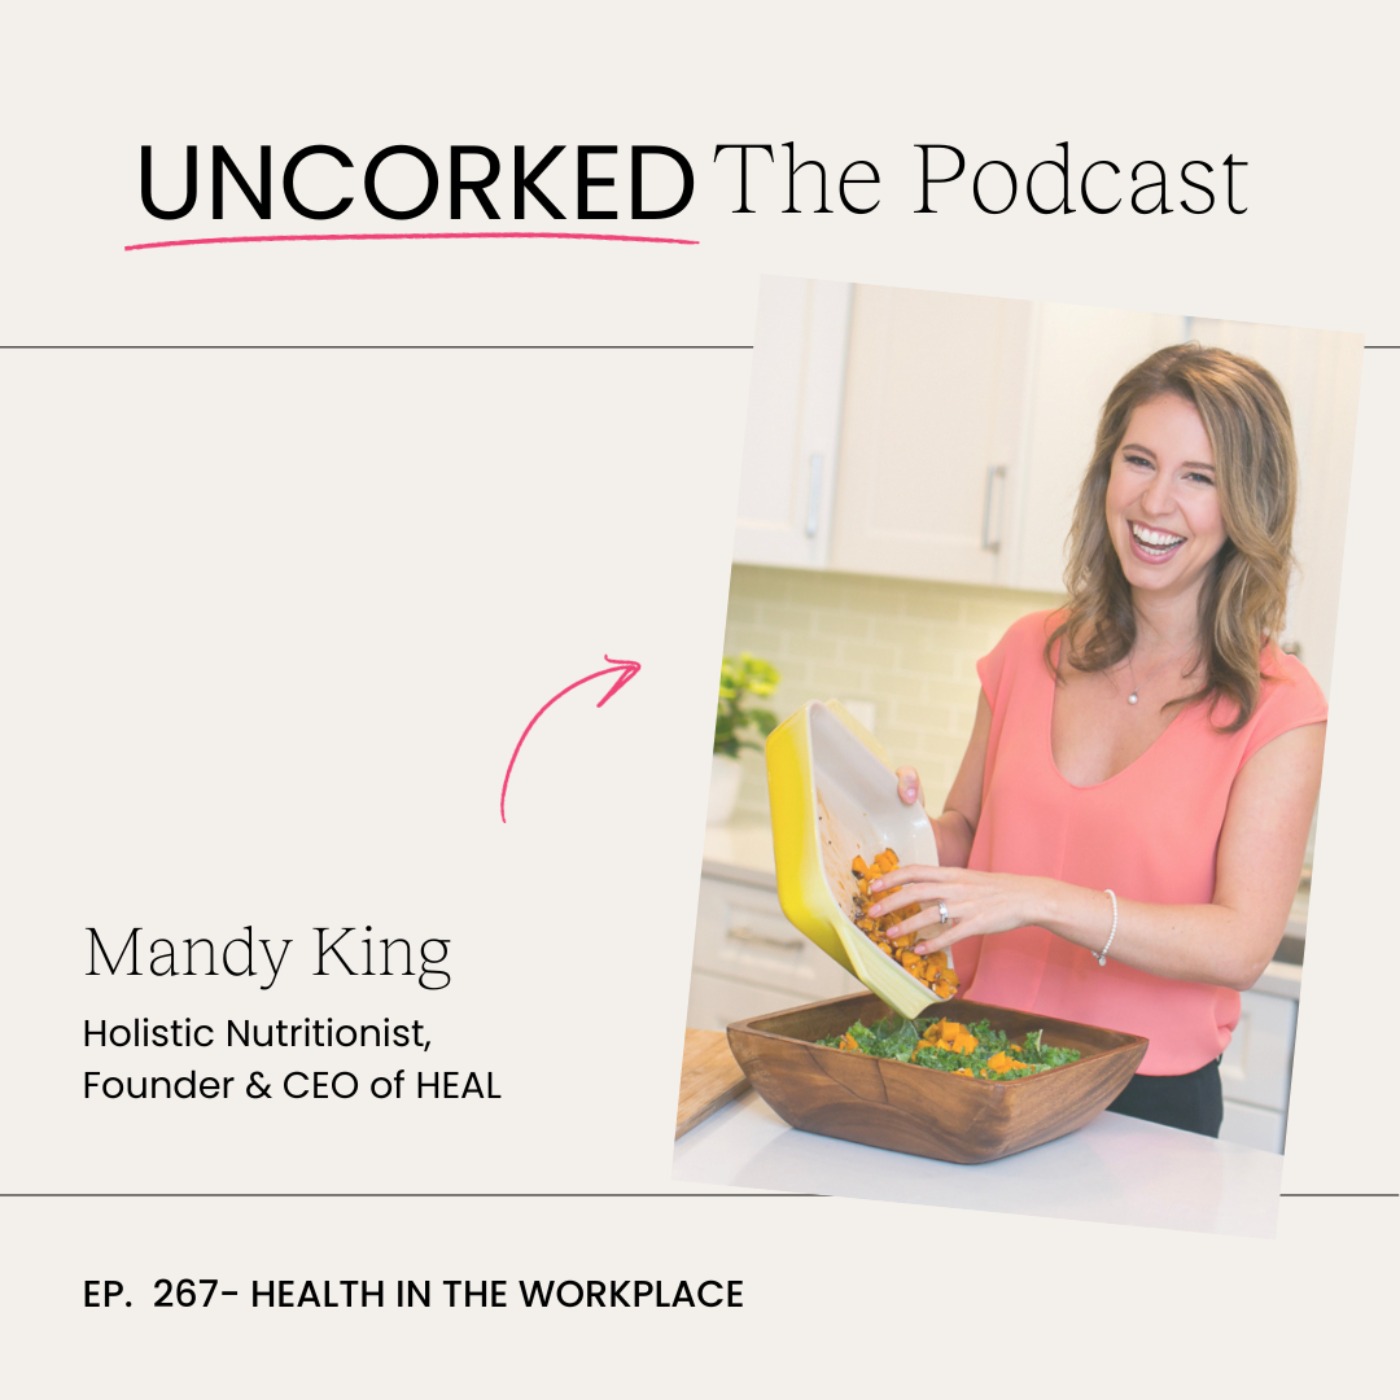 Health in the Workplace with Mandy King